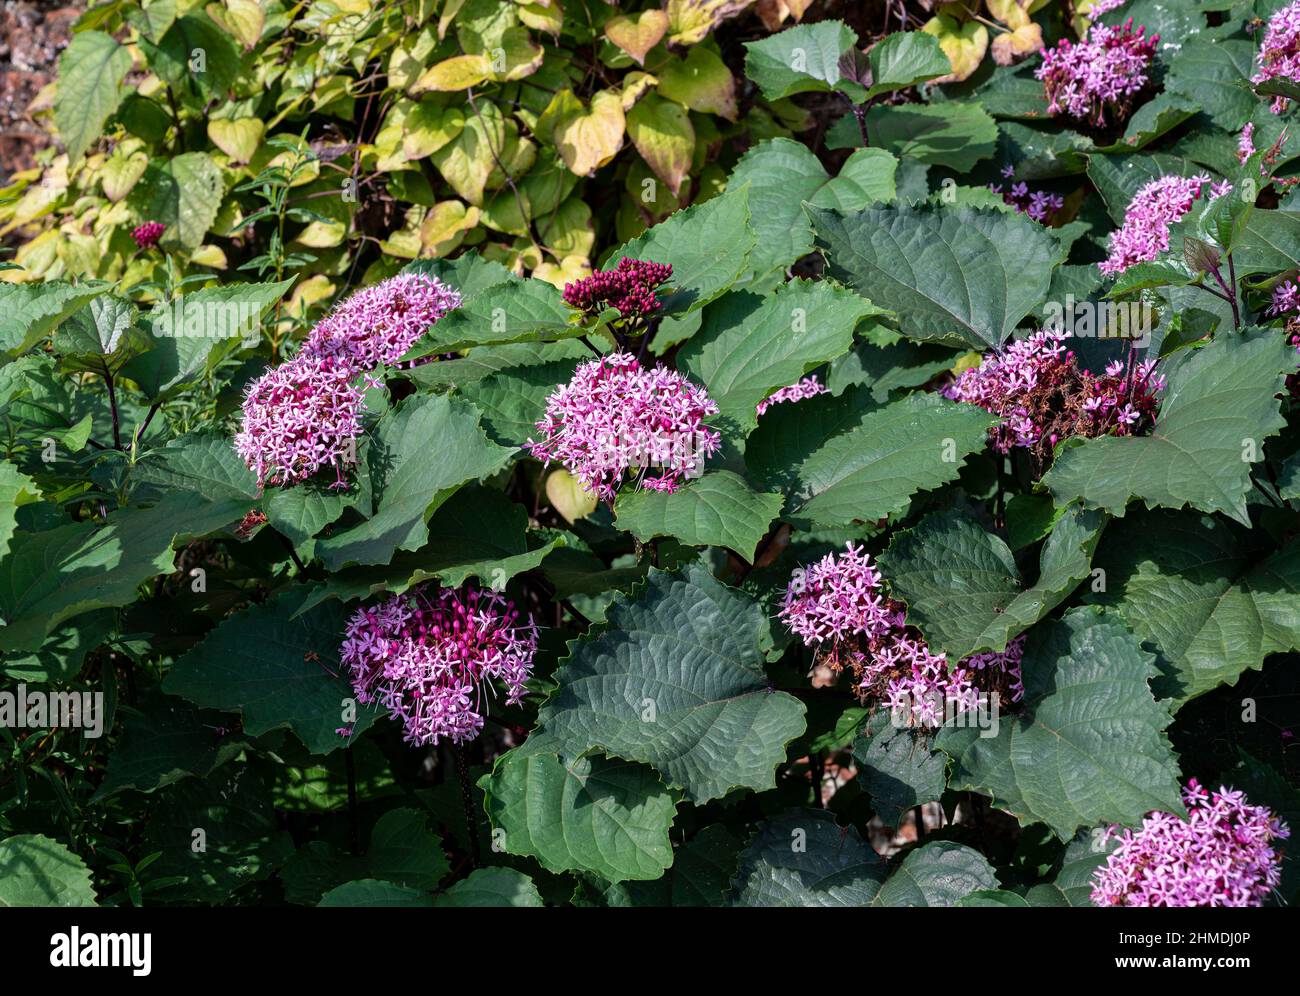 Clerodendrum foetidum, Lamiaceae, clerodendrum bungei, glory flower. Pink blooms or flowers. Stock Photo